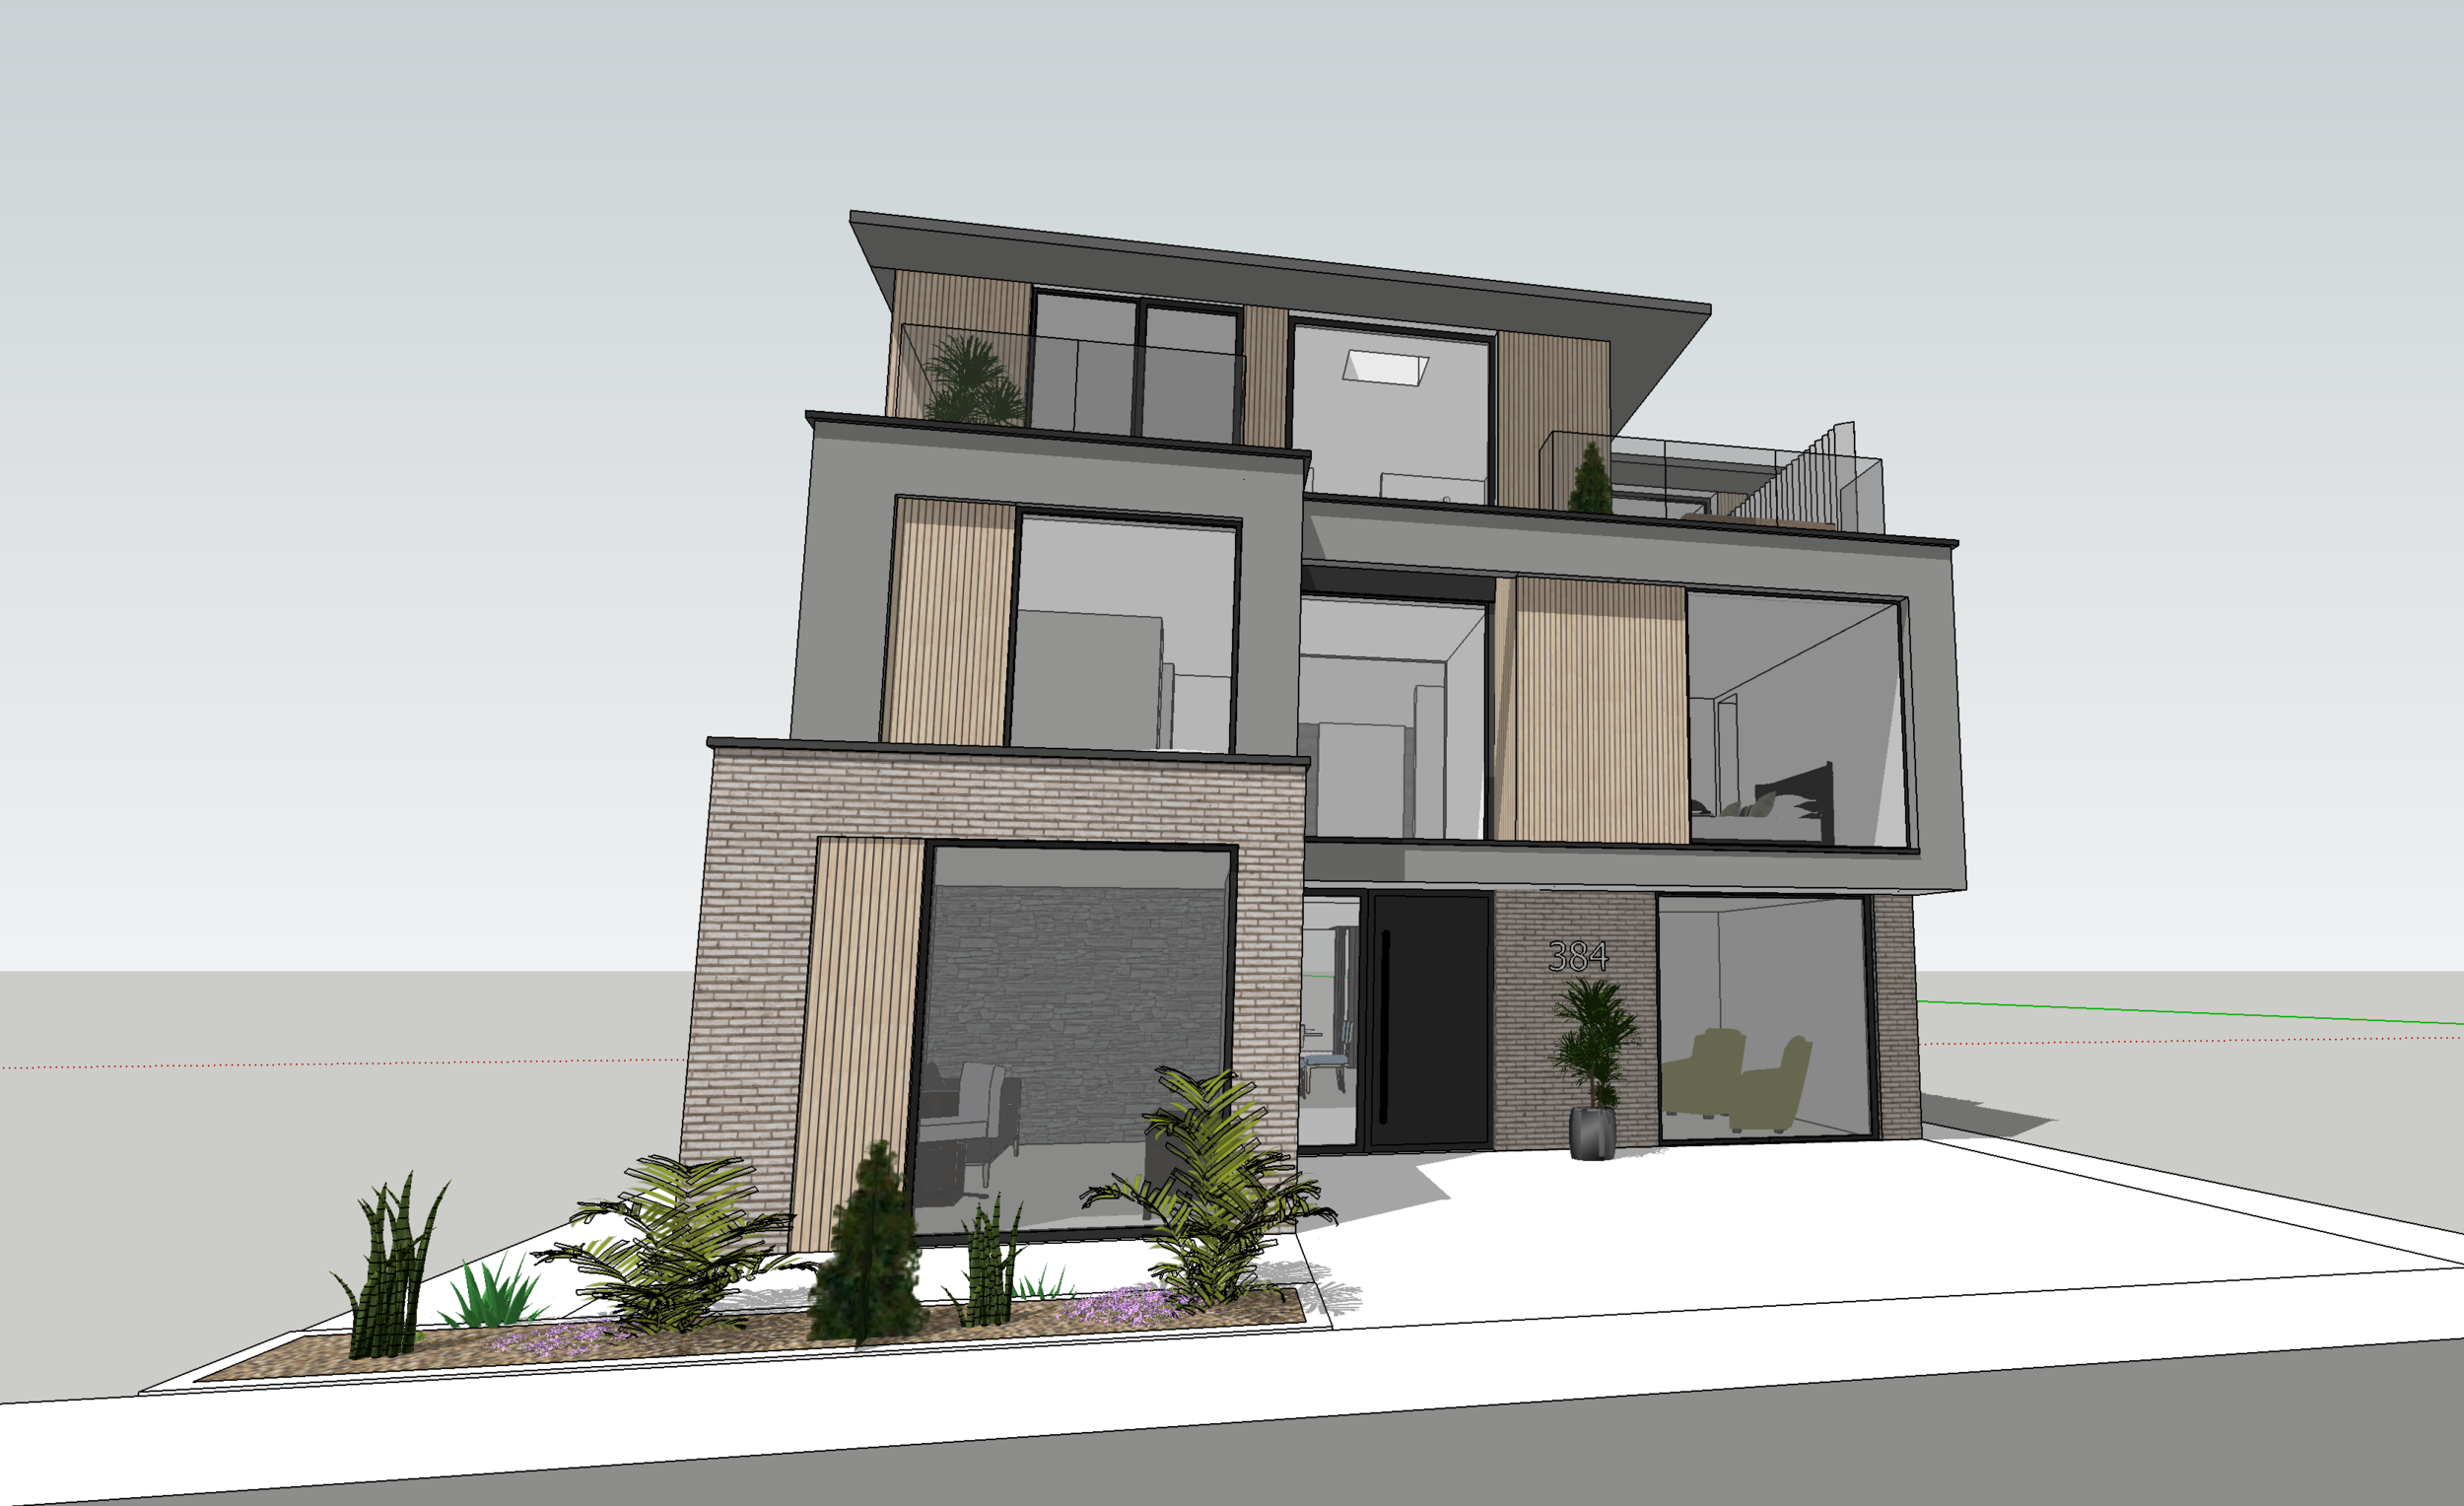 Self Build Home Design At N Hill